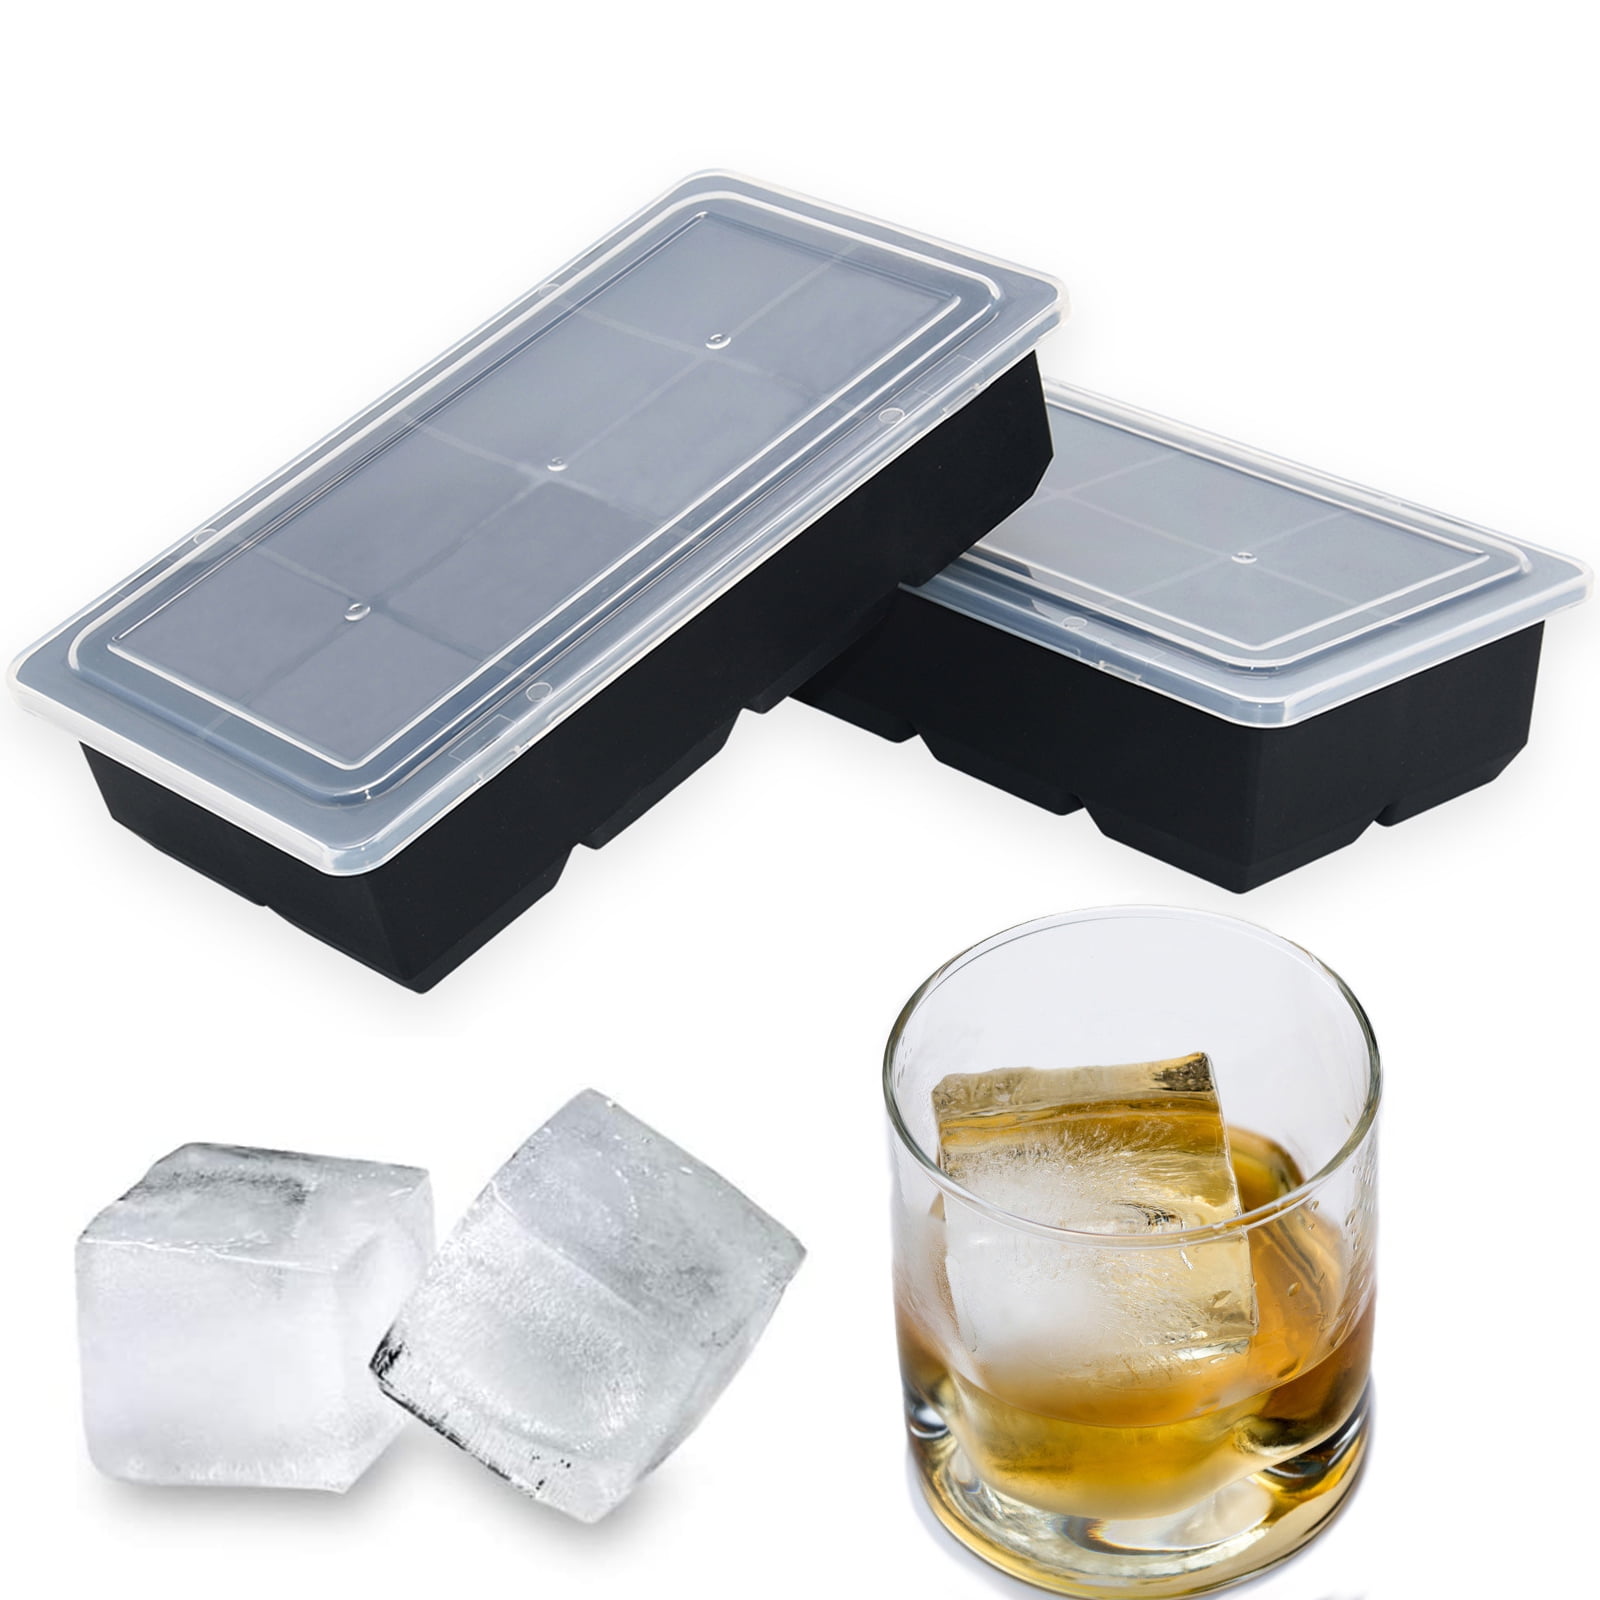 Bangp Clear Ice Cube Maker,Clear Ice Cube Mold with Reusable Ice